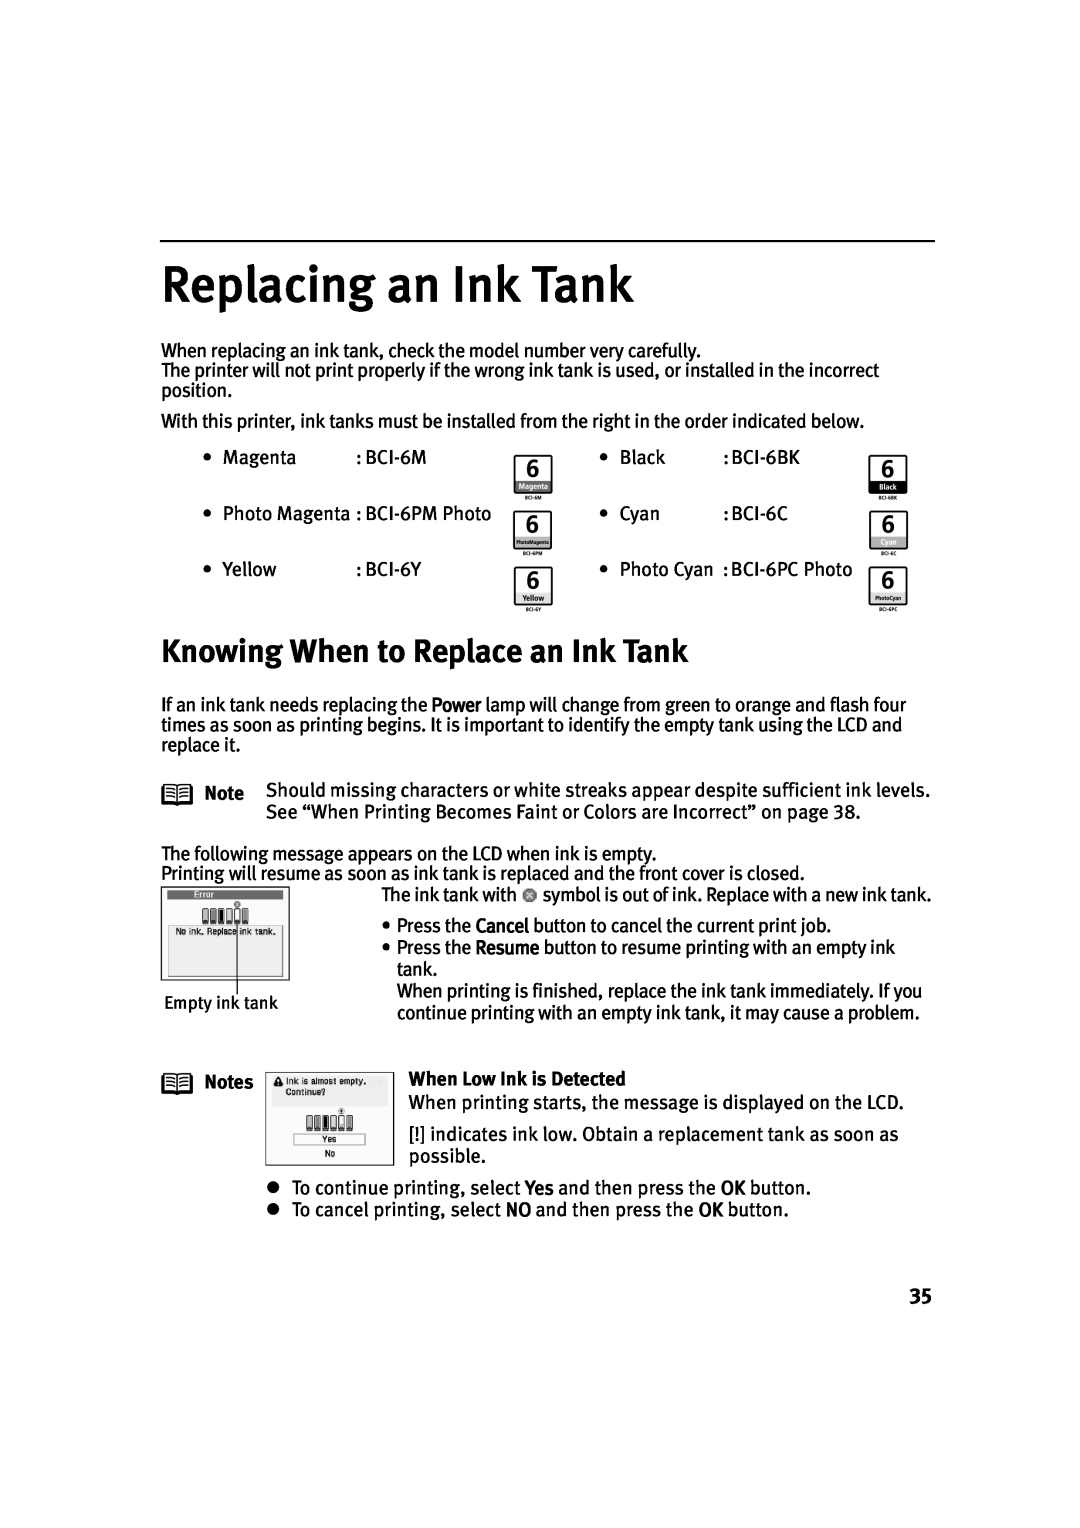 Canon 900D manual Replacing an Ink Tank, Knowing When to Replace an Ink Tank, When Low Ink is Detected 